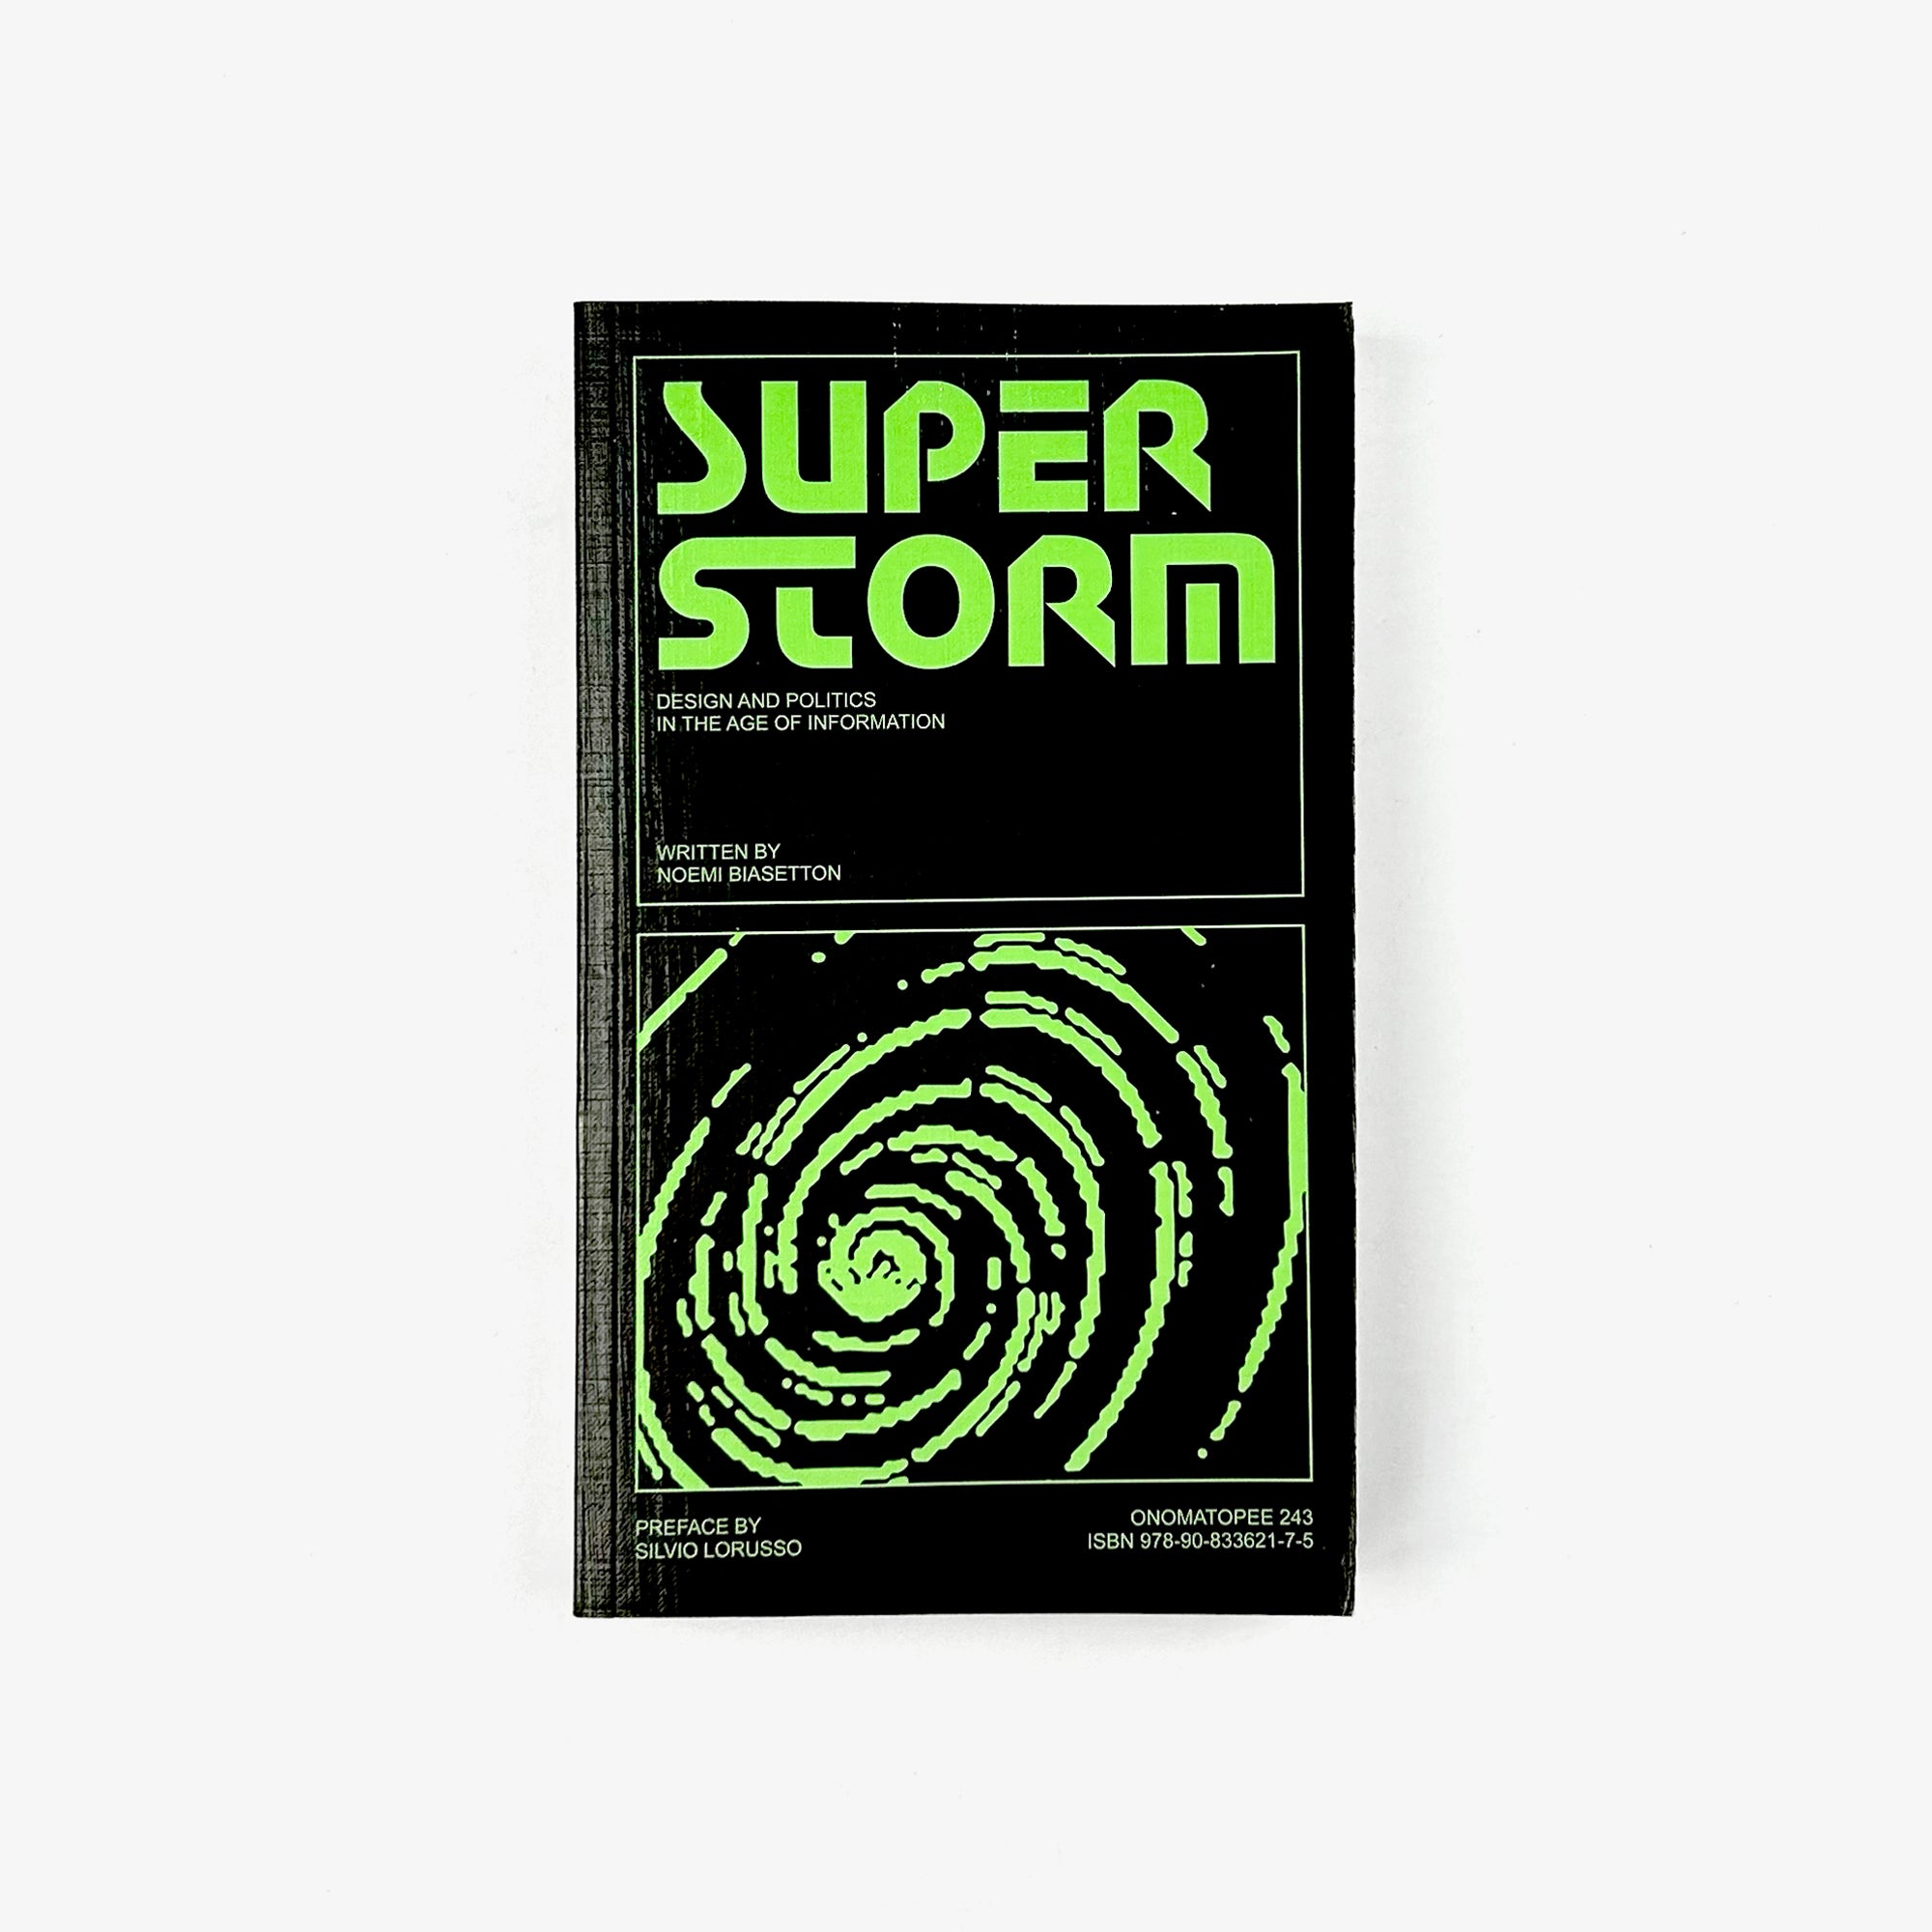 Superstorm: Design and Politics in the Age of Information